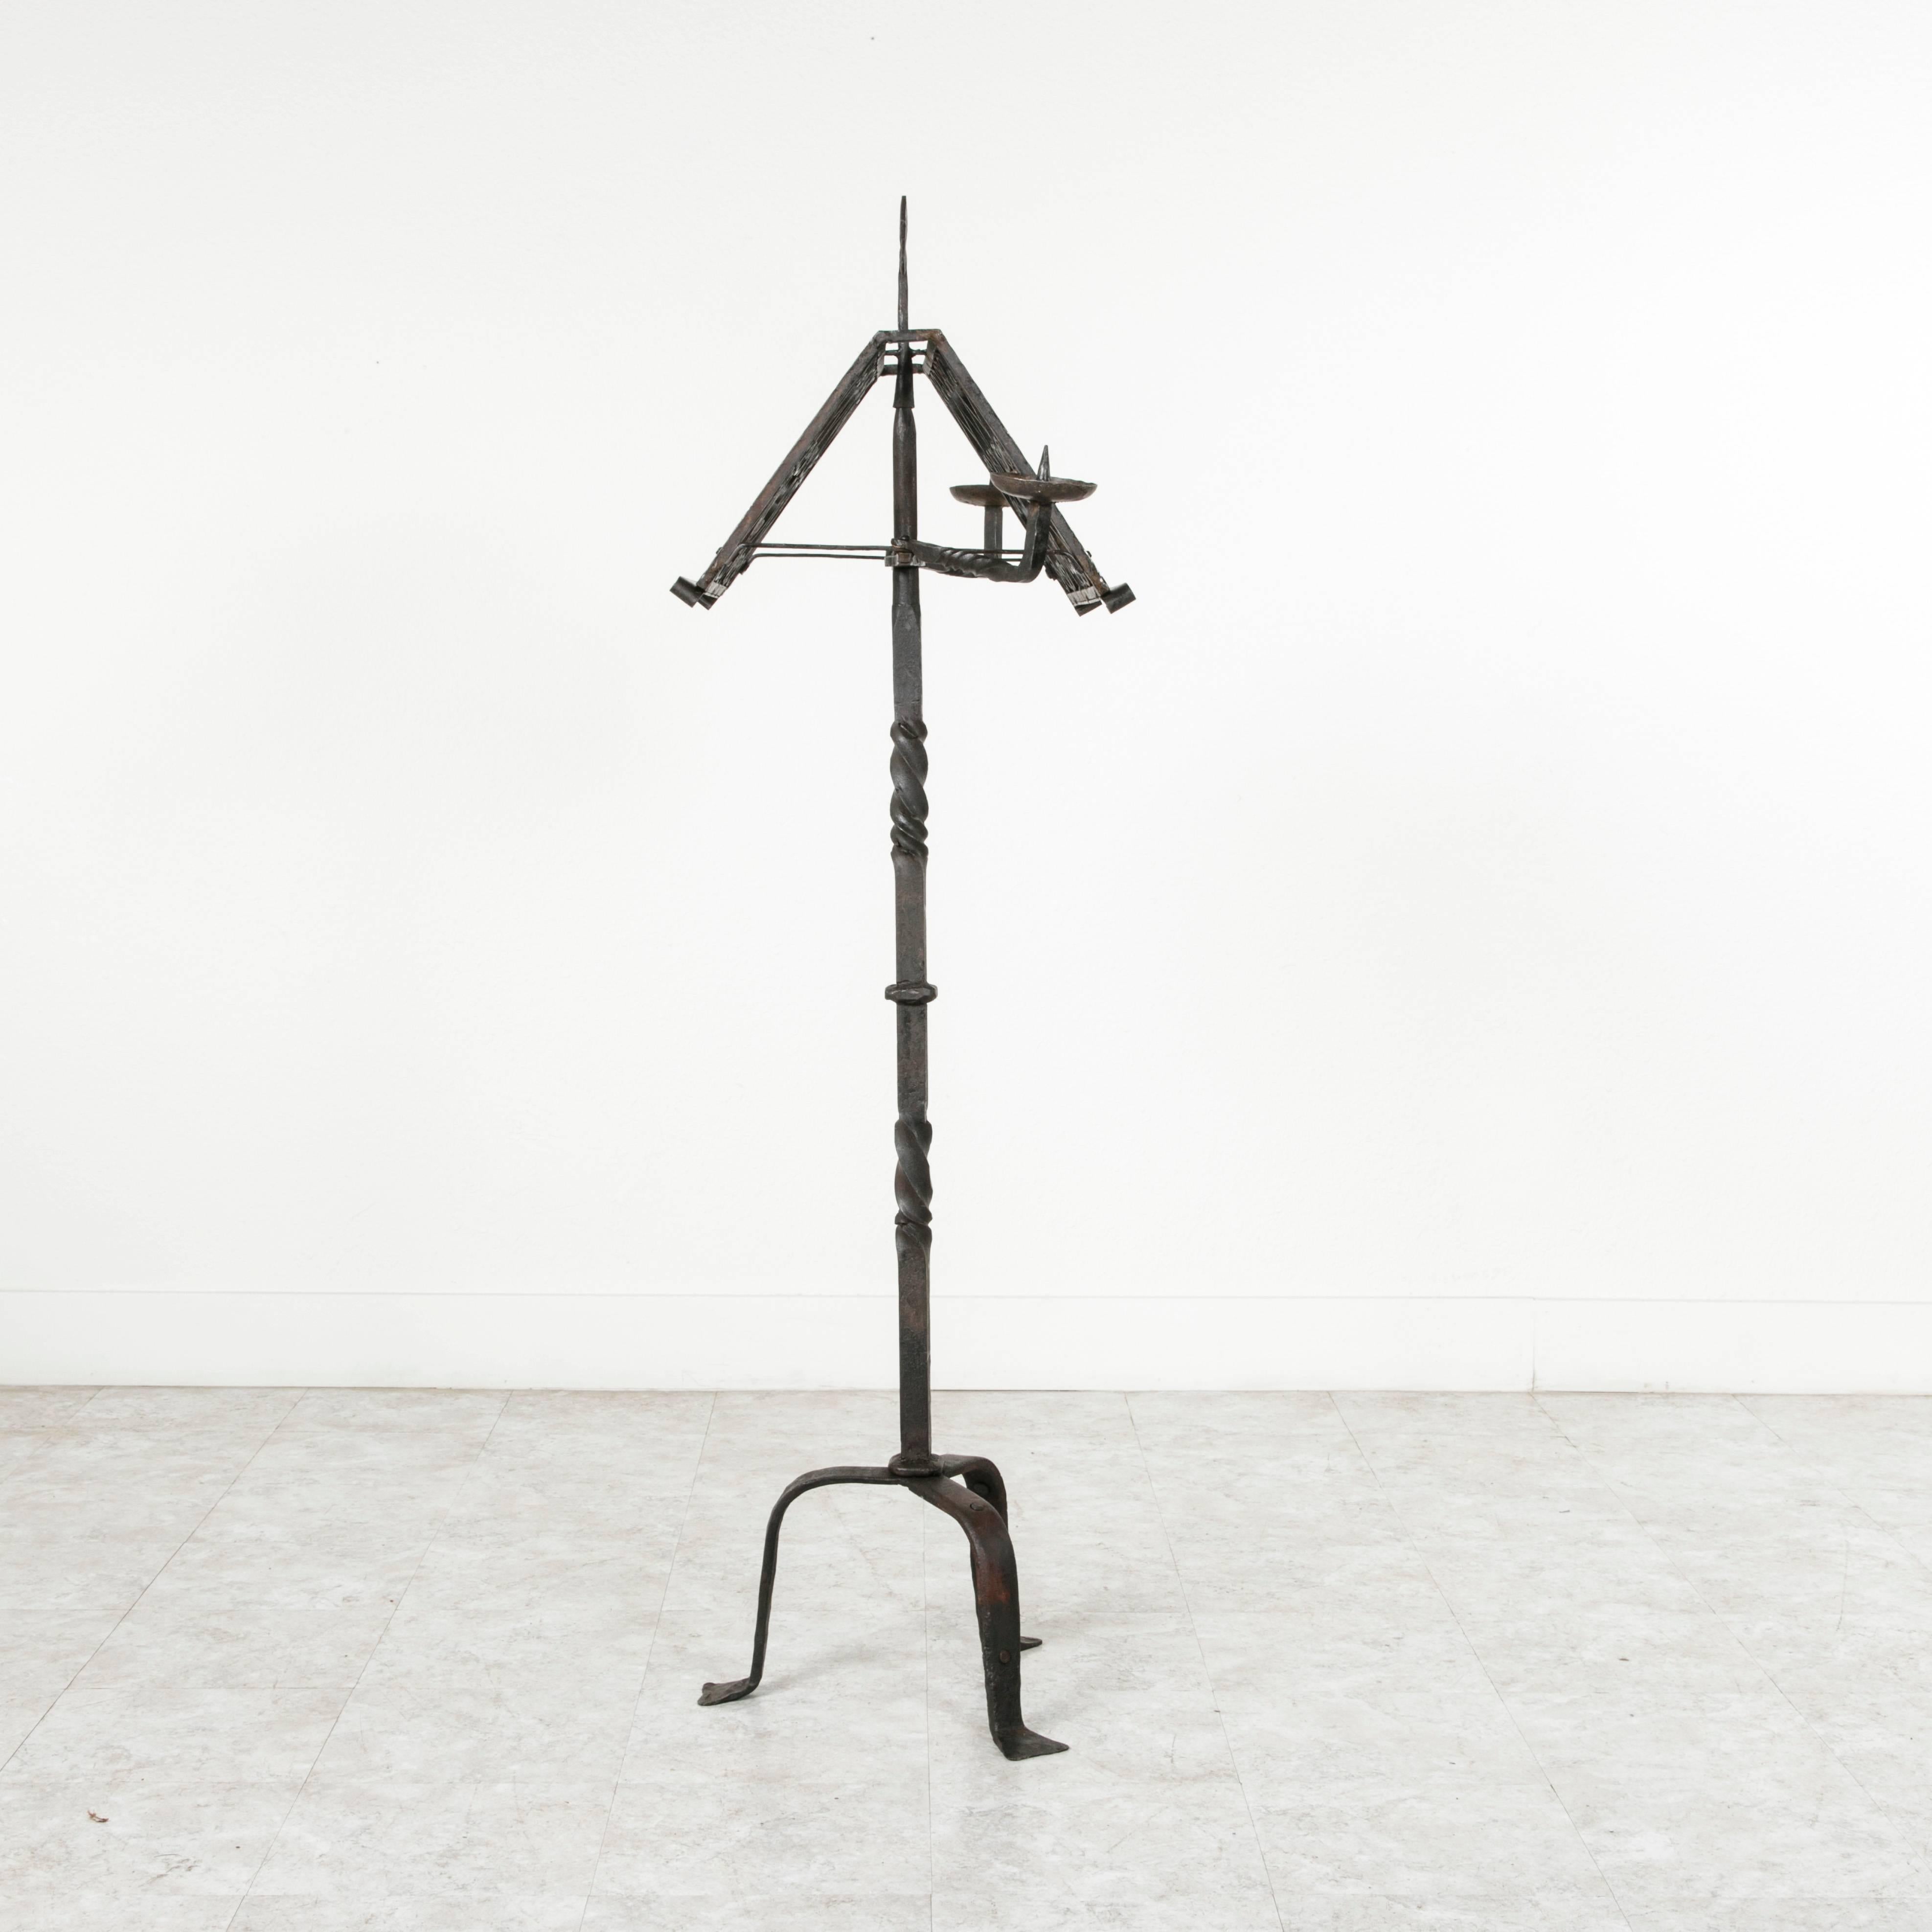 This impressive hand-forged iron music stand is designed so that a musician can stand on each side. Candleholders extend on the left and right to light sheet music and a central fleur-de-lys rises from the top. The age and heavy hand-forged iron of